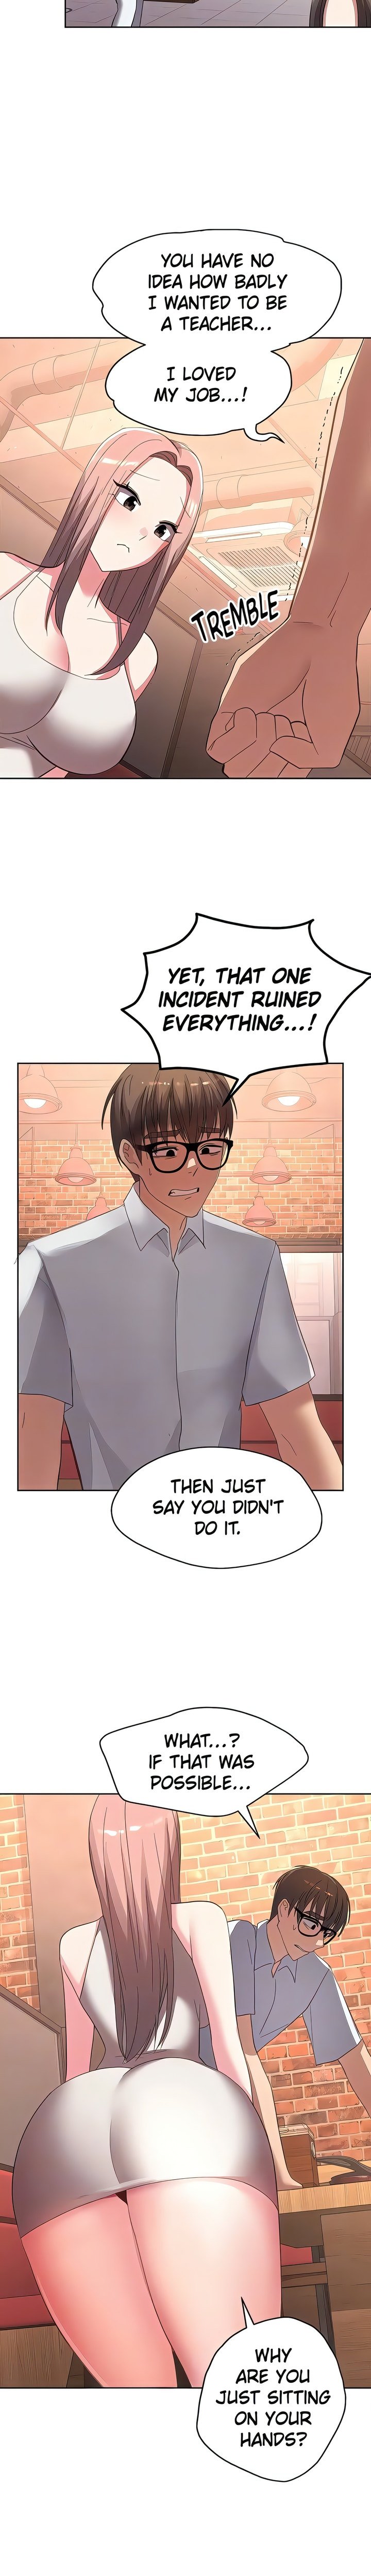 girls-i-used-to-teach-chap-37-17